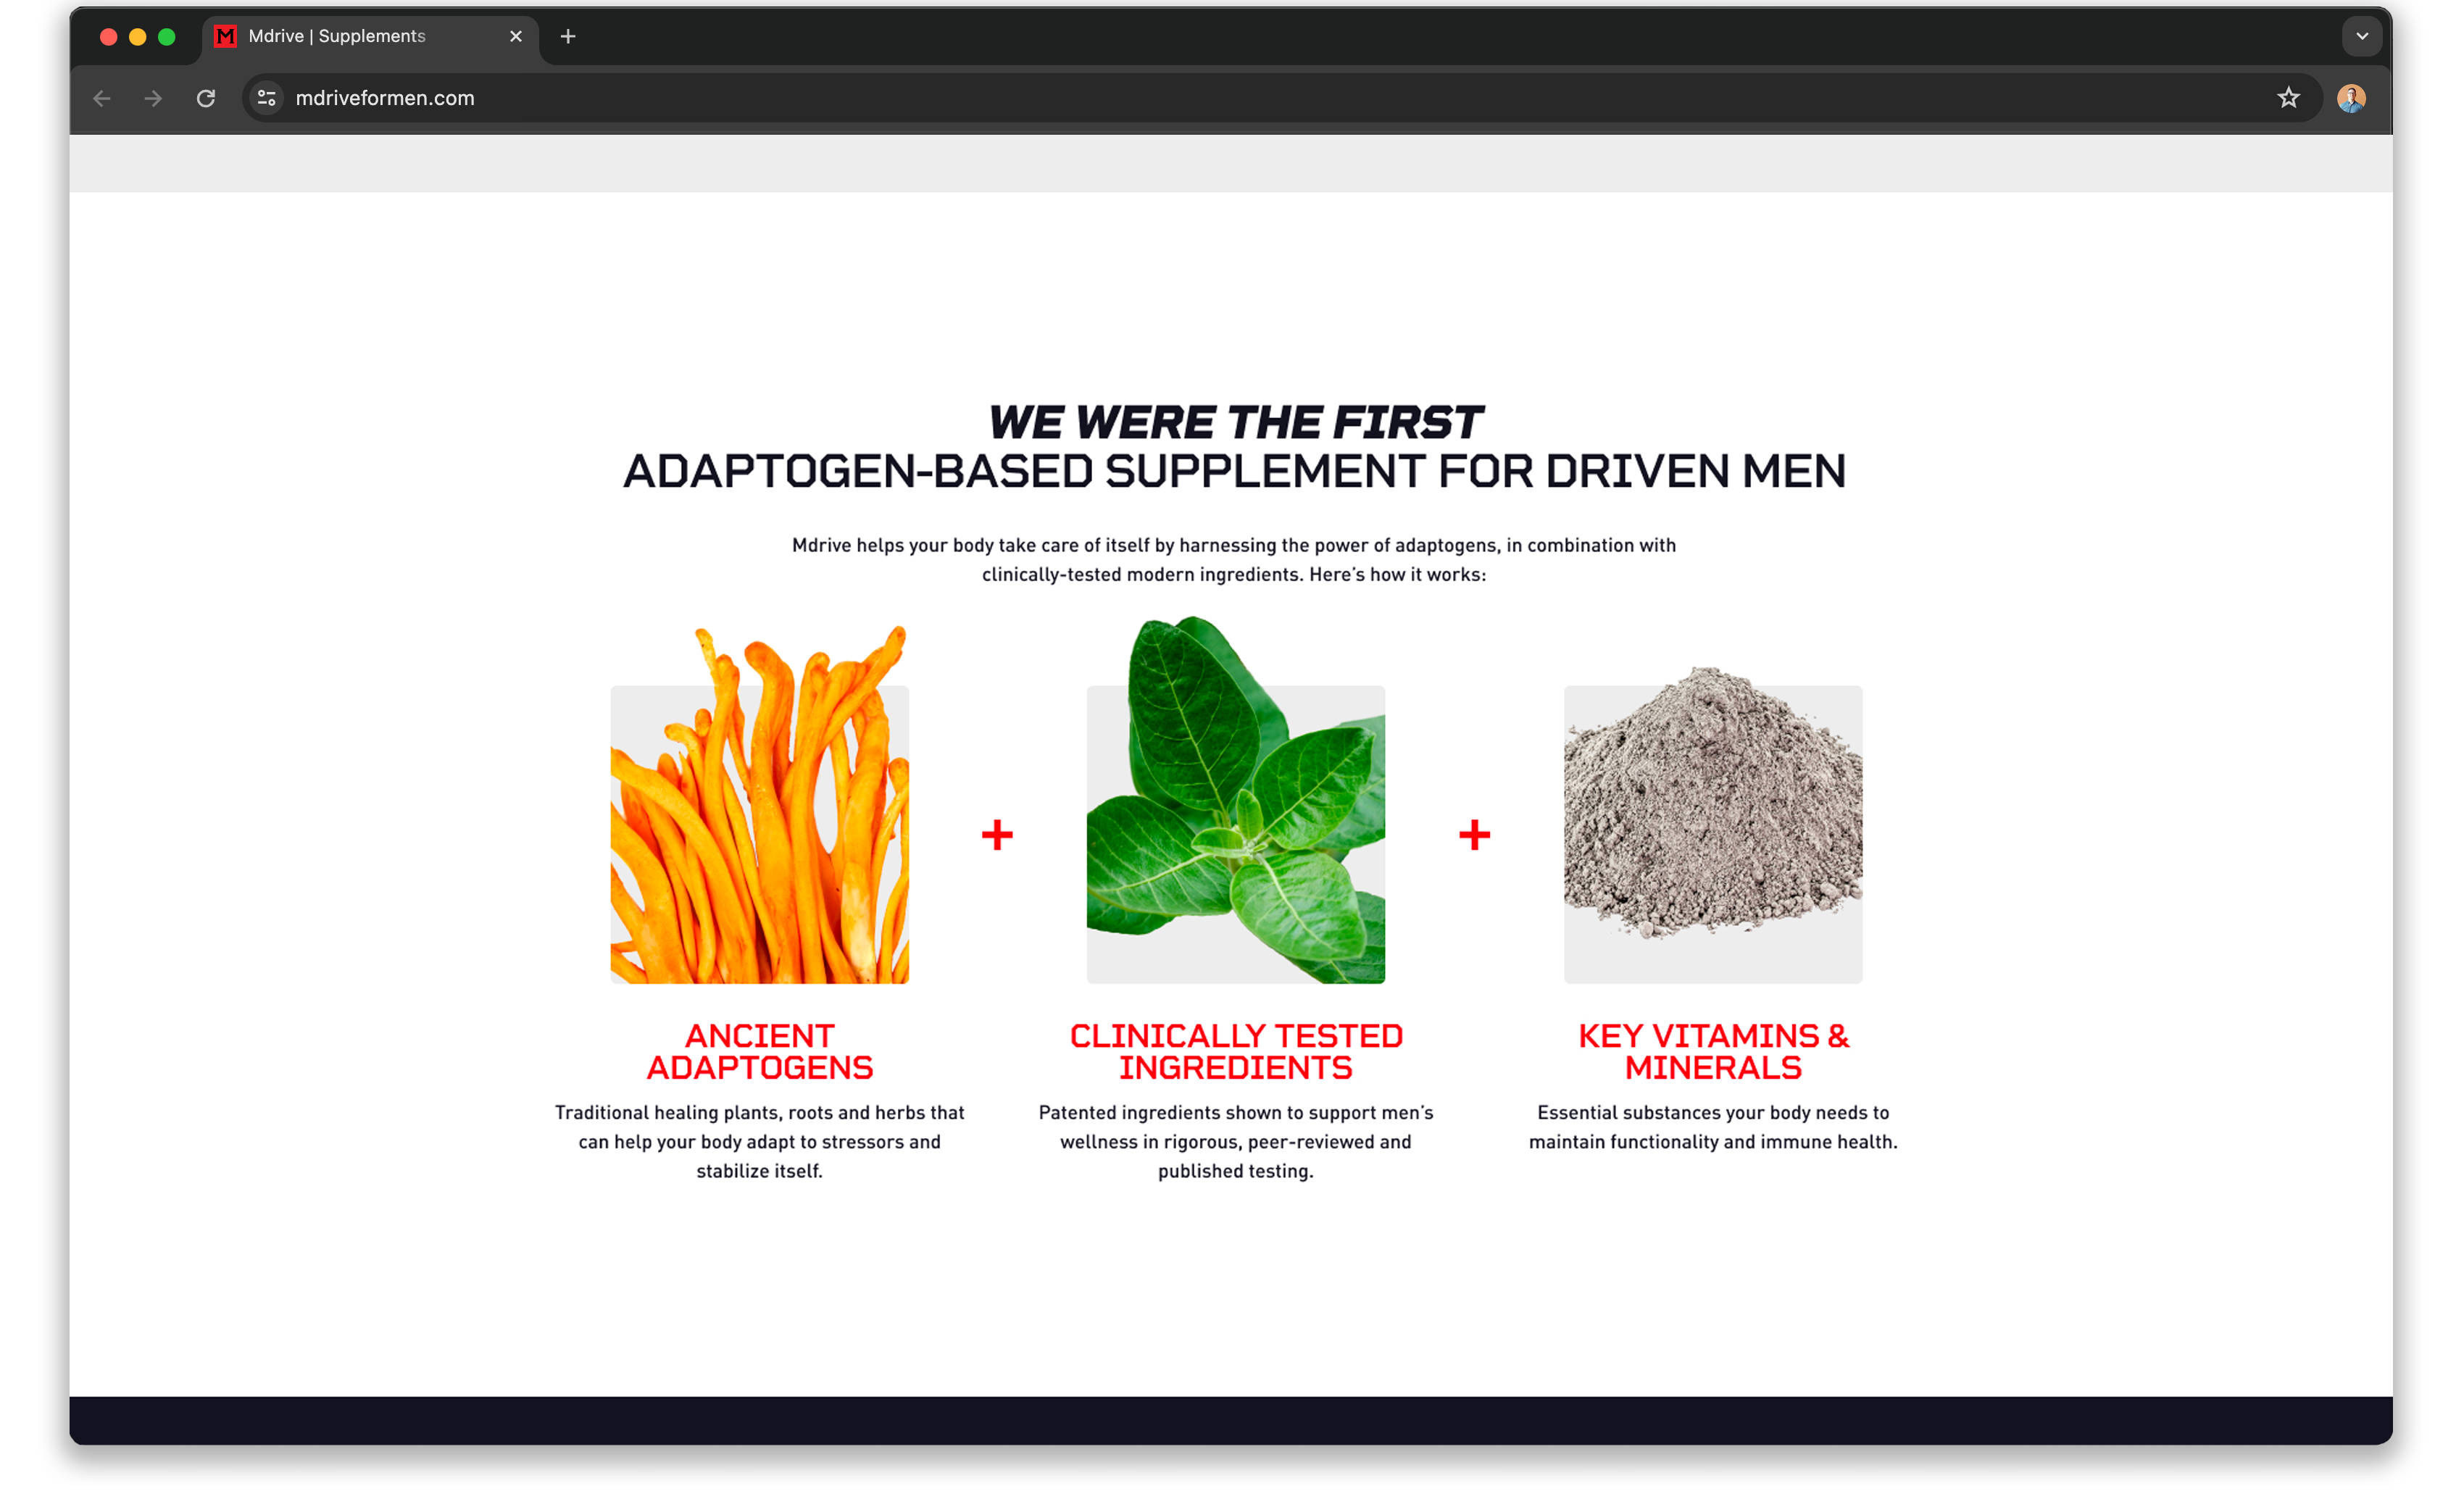 Index page mocked up in browser window showing M Drive being adaptogens plus clinically tested ingredients plus key vitamins